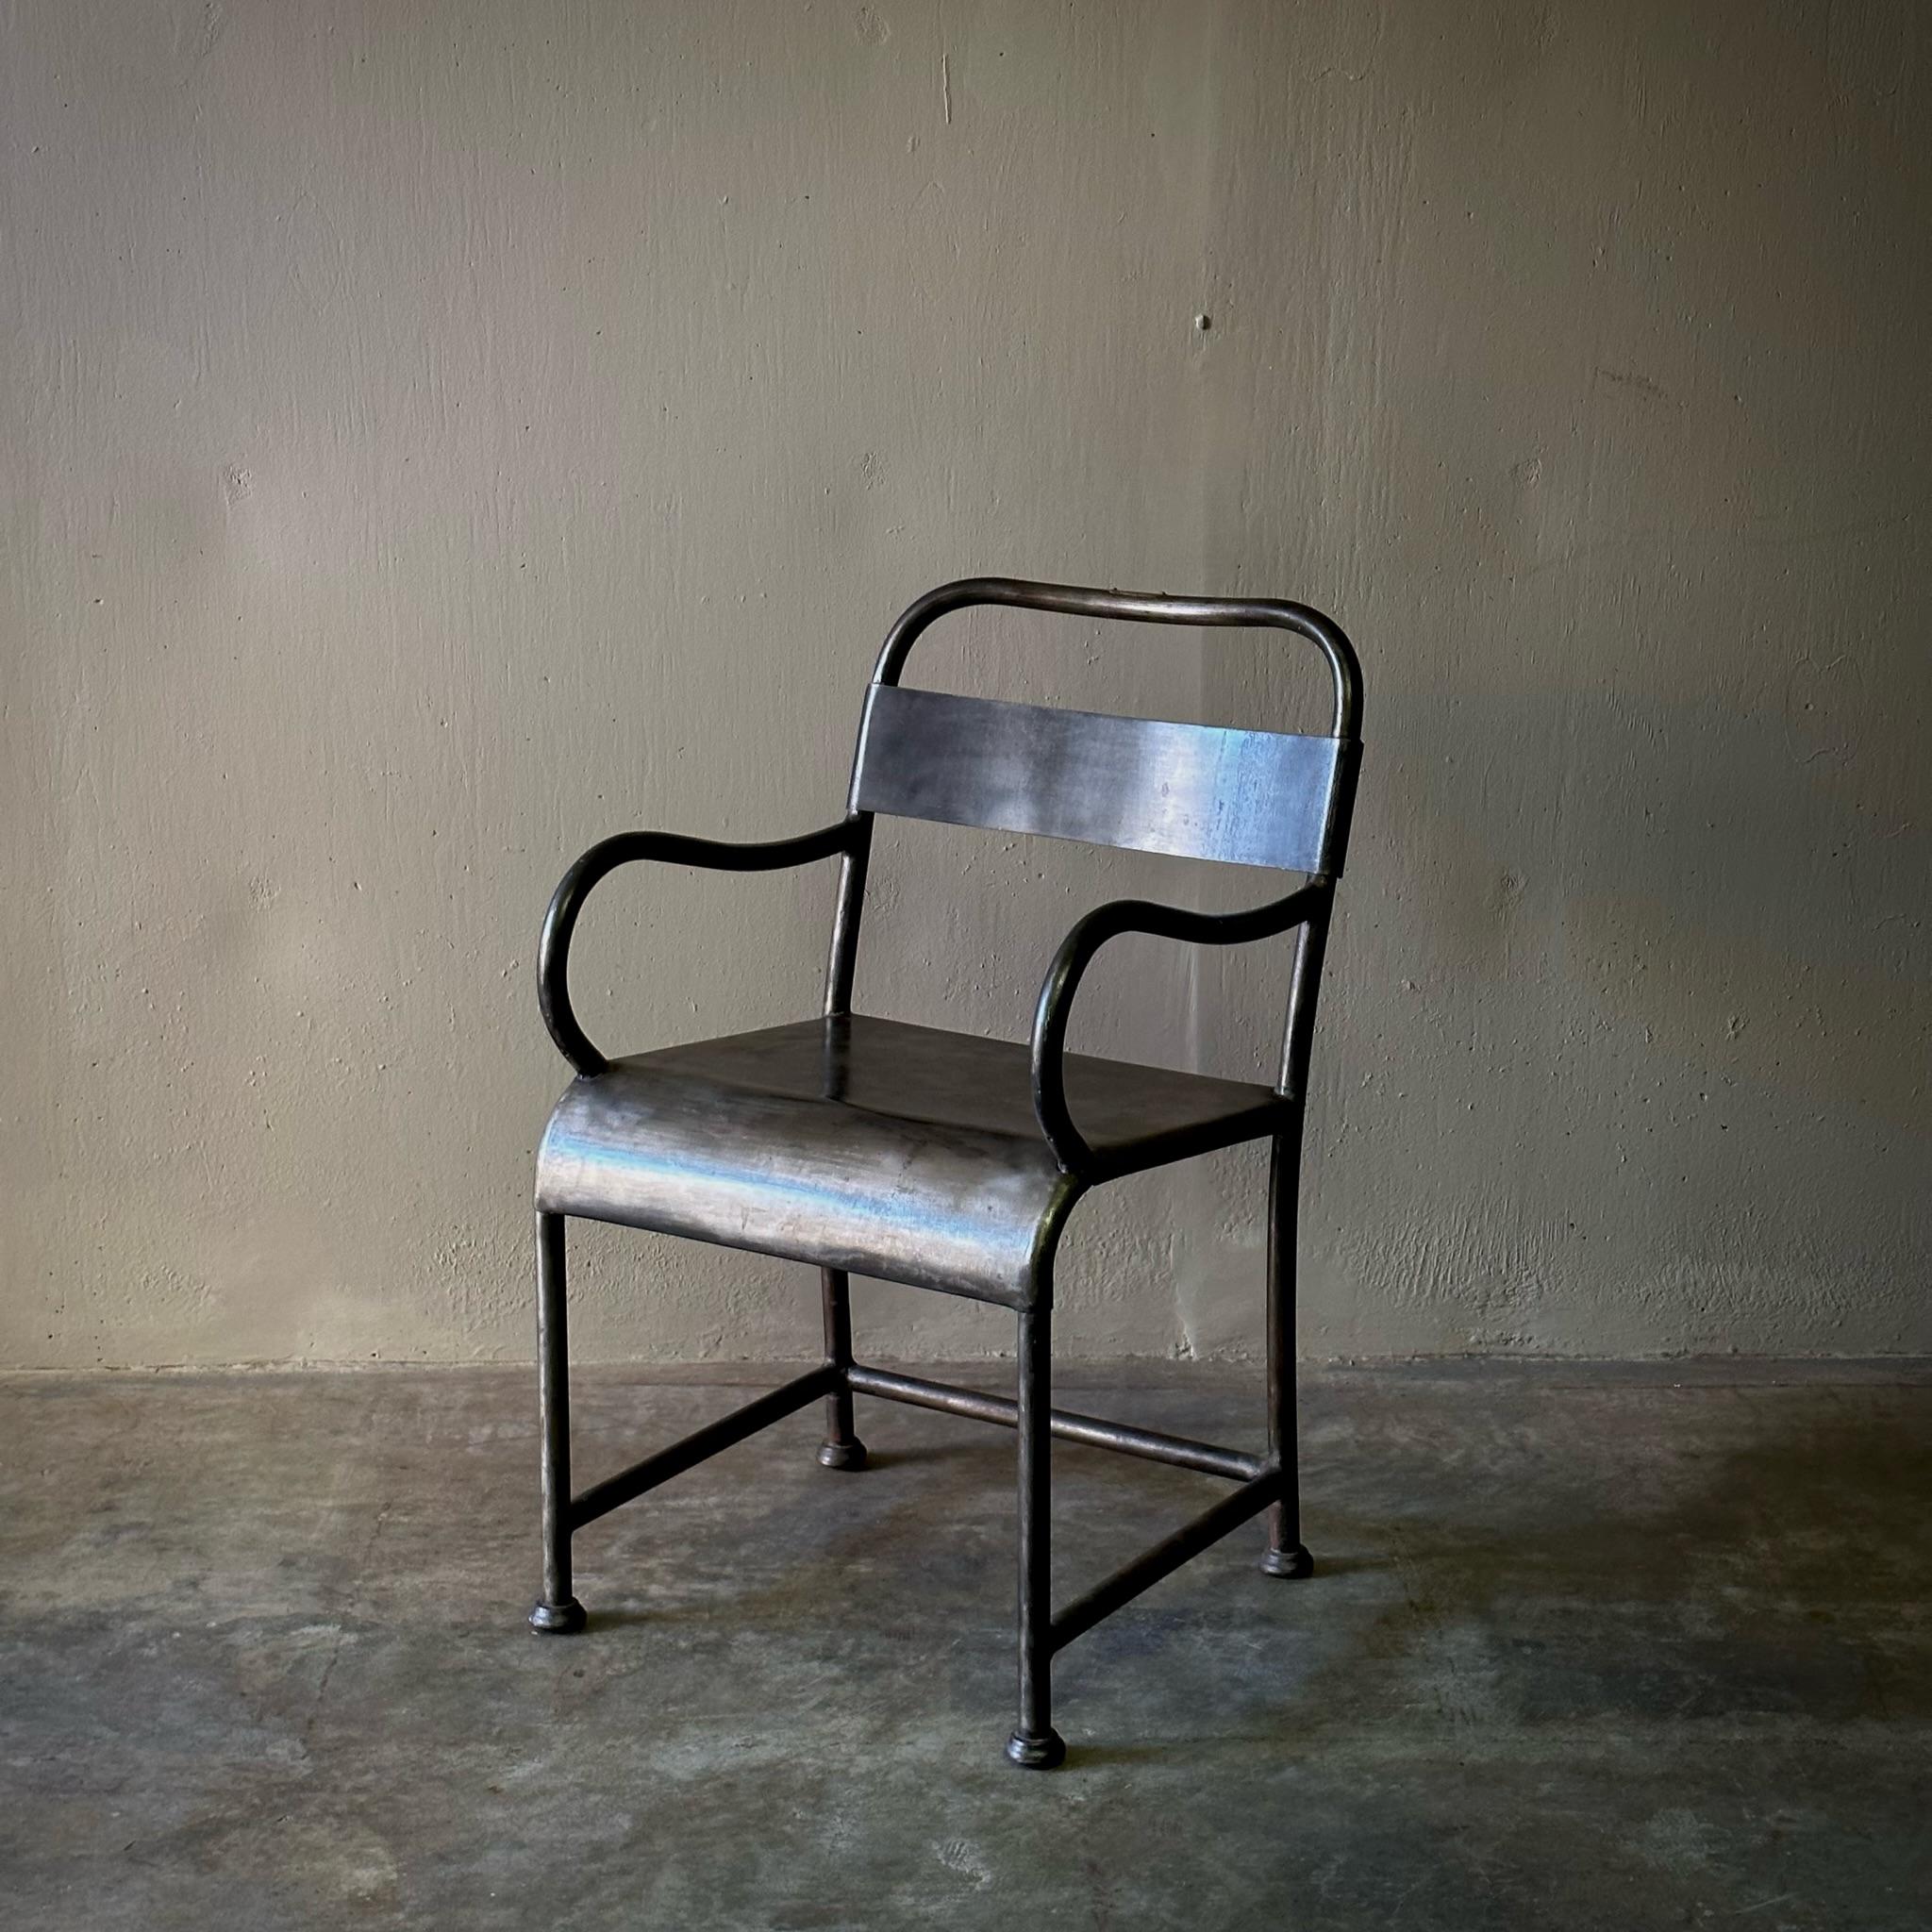 1940s French industrial metal chair. Would work well in both indoor and outdoor spaces with its cool, clean traditional lines. Gritty and strong yet with a delicate, refined sensibility. 

France, circa 1940.

Dimensions: 19.7 W x 17.3 D x 33.1